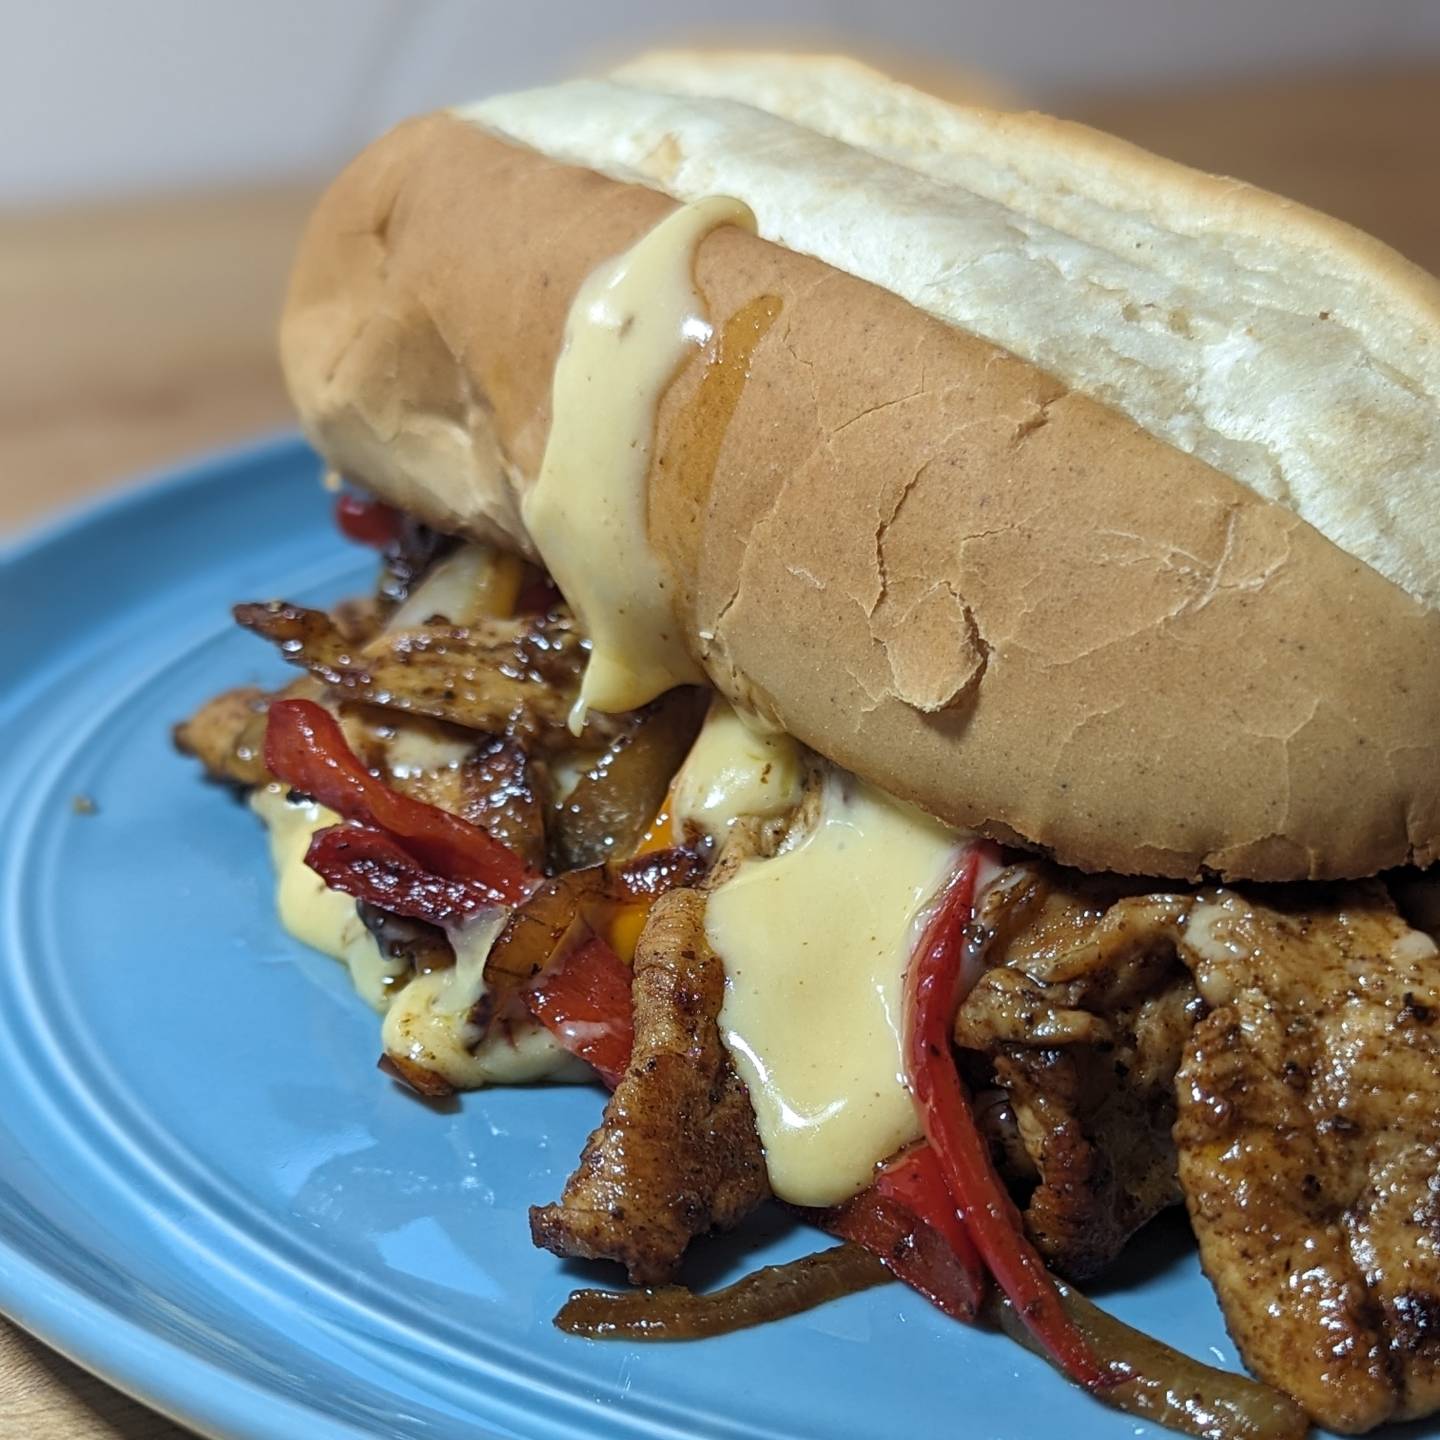 Chicken Cheesesteak sandwich Thin sliced chicken, onions, peppers and cheese sauce. That cheese sauce u made was the perfect cheese base for so many meals, ready to go and just add liquid to adjust consistency. Yes, that's a real roll. #cheesesteak #cheesesauce #cheesedrip #chickencheese #sandwichoftheday #sandwiches